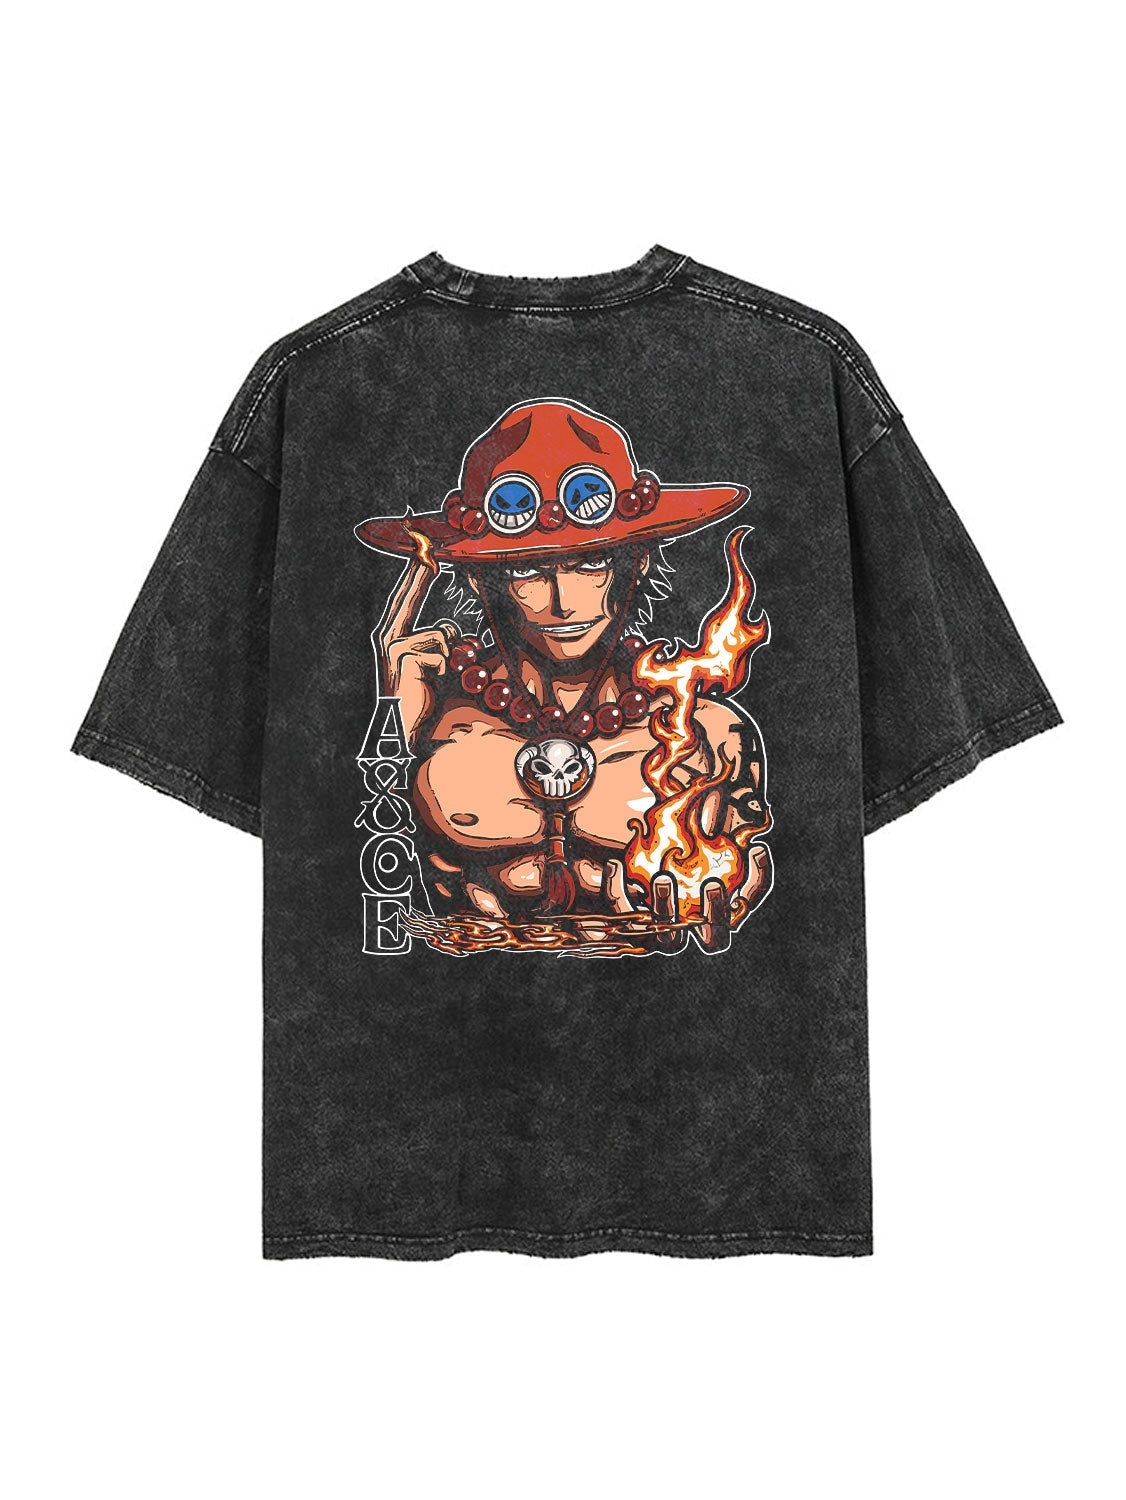 [Trzn] Fire Fist Ace 2-Sided Vintage Tee Attack Titan